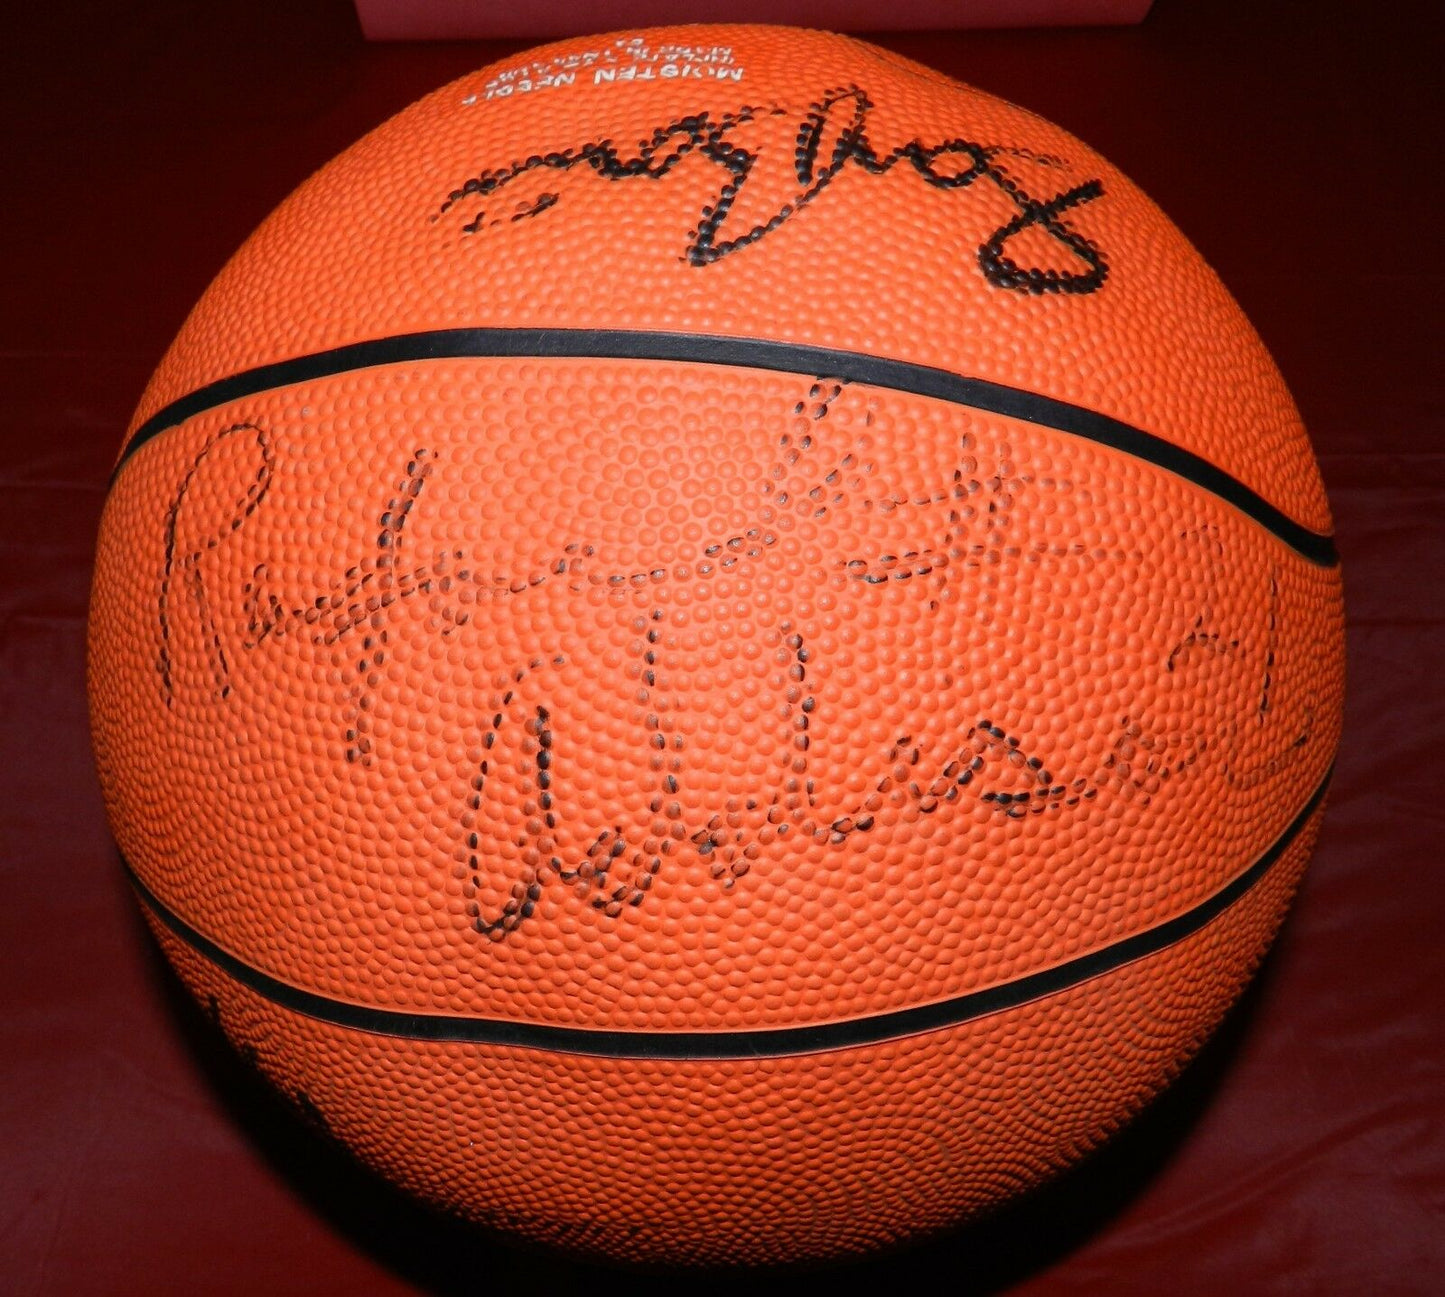 Drazen Petrovic Autographed Basketball with JSA COA Derrick Coleman and more